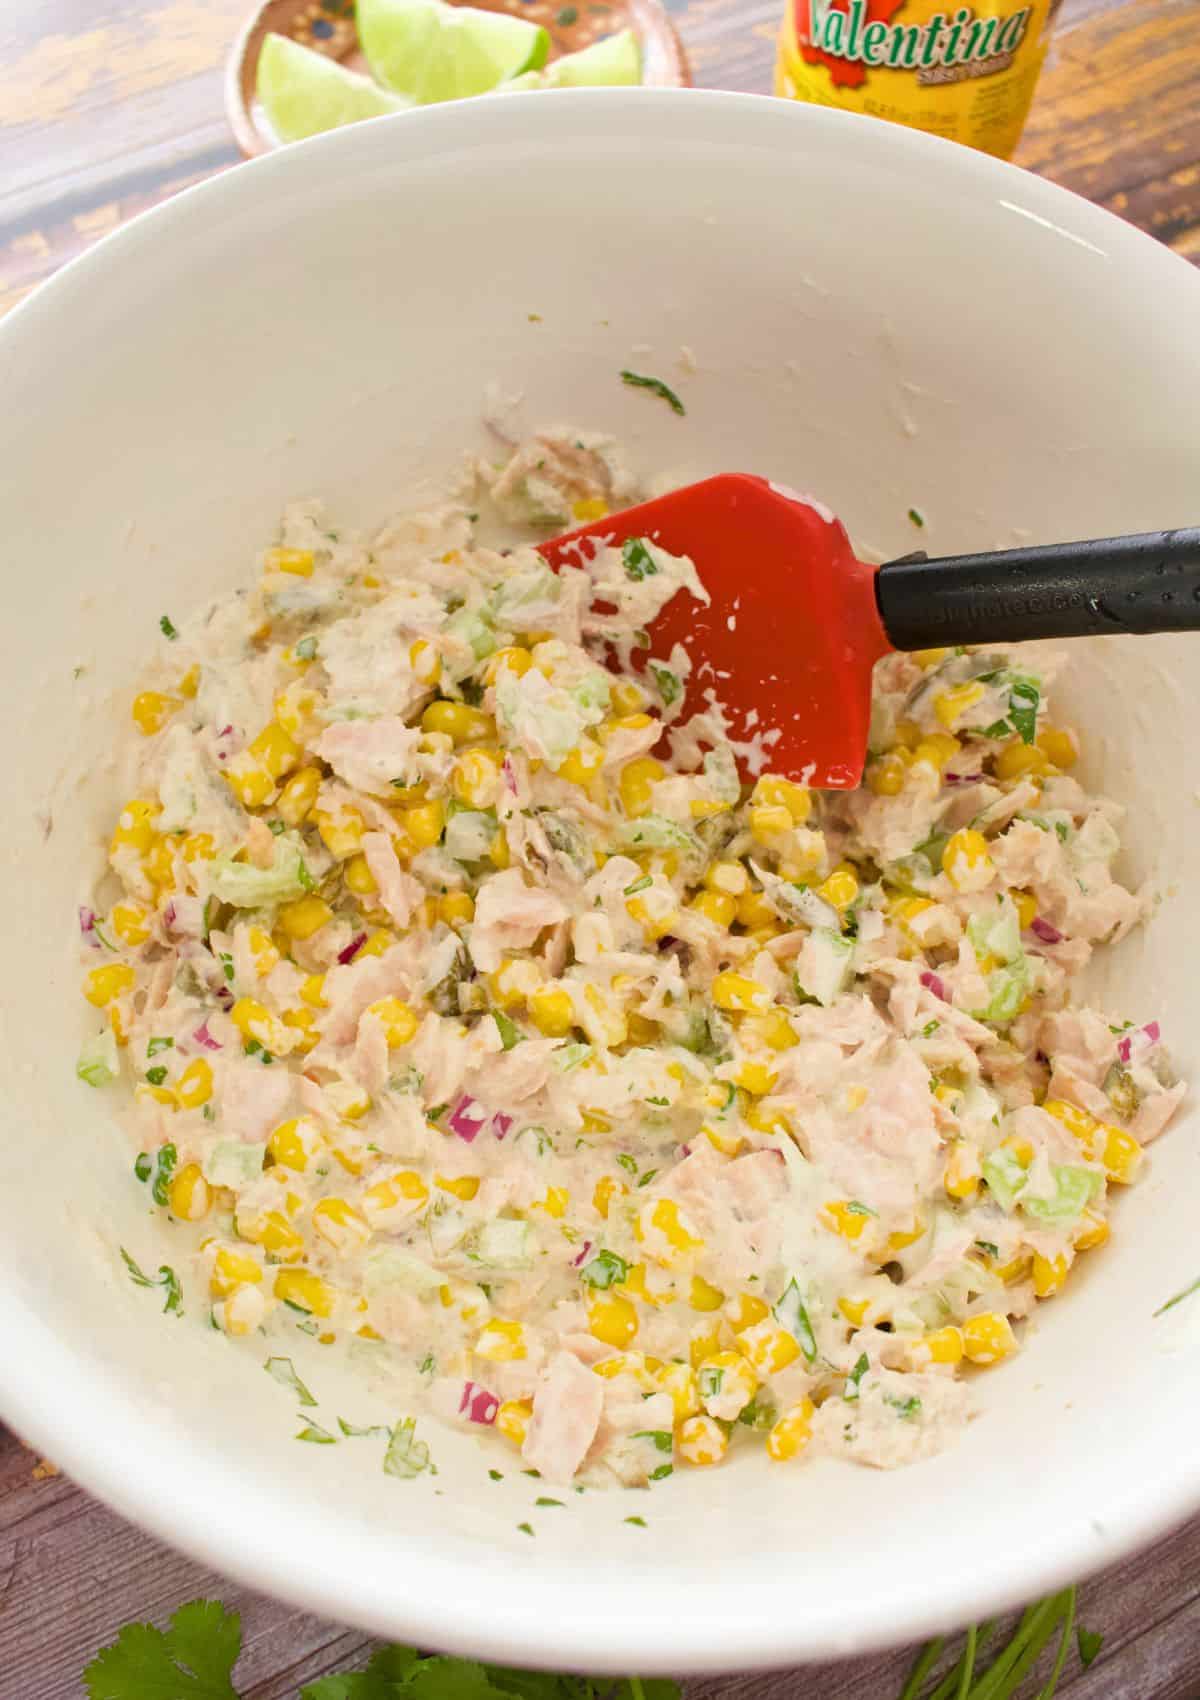 Mixing the ingredients with a red rubber spatula in a large white bowl.